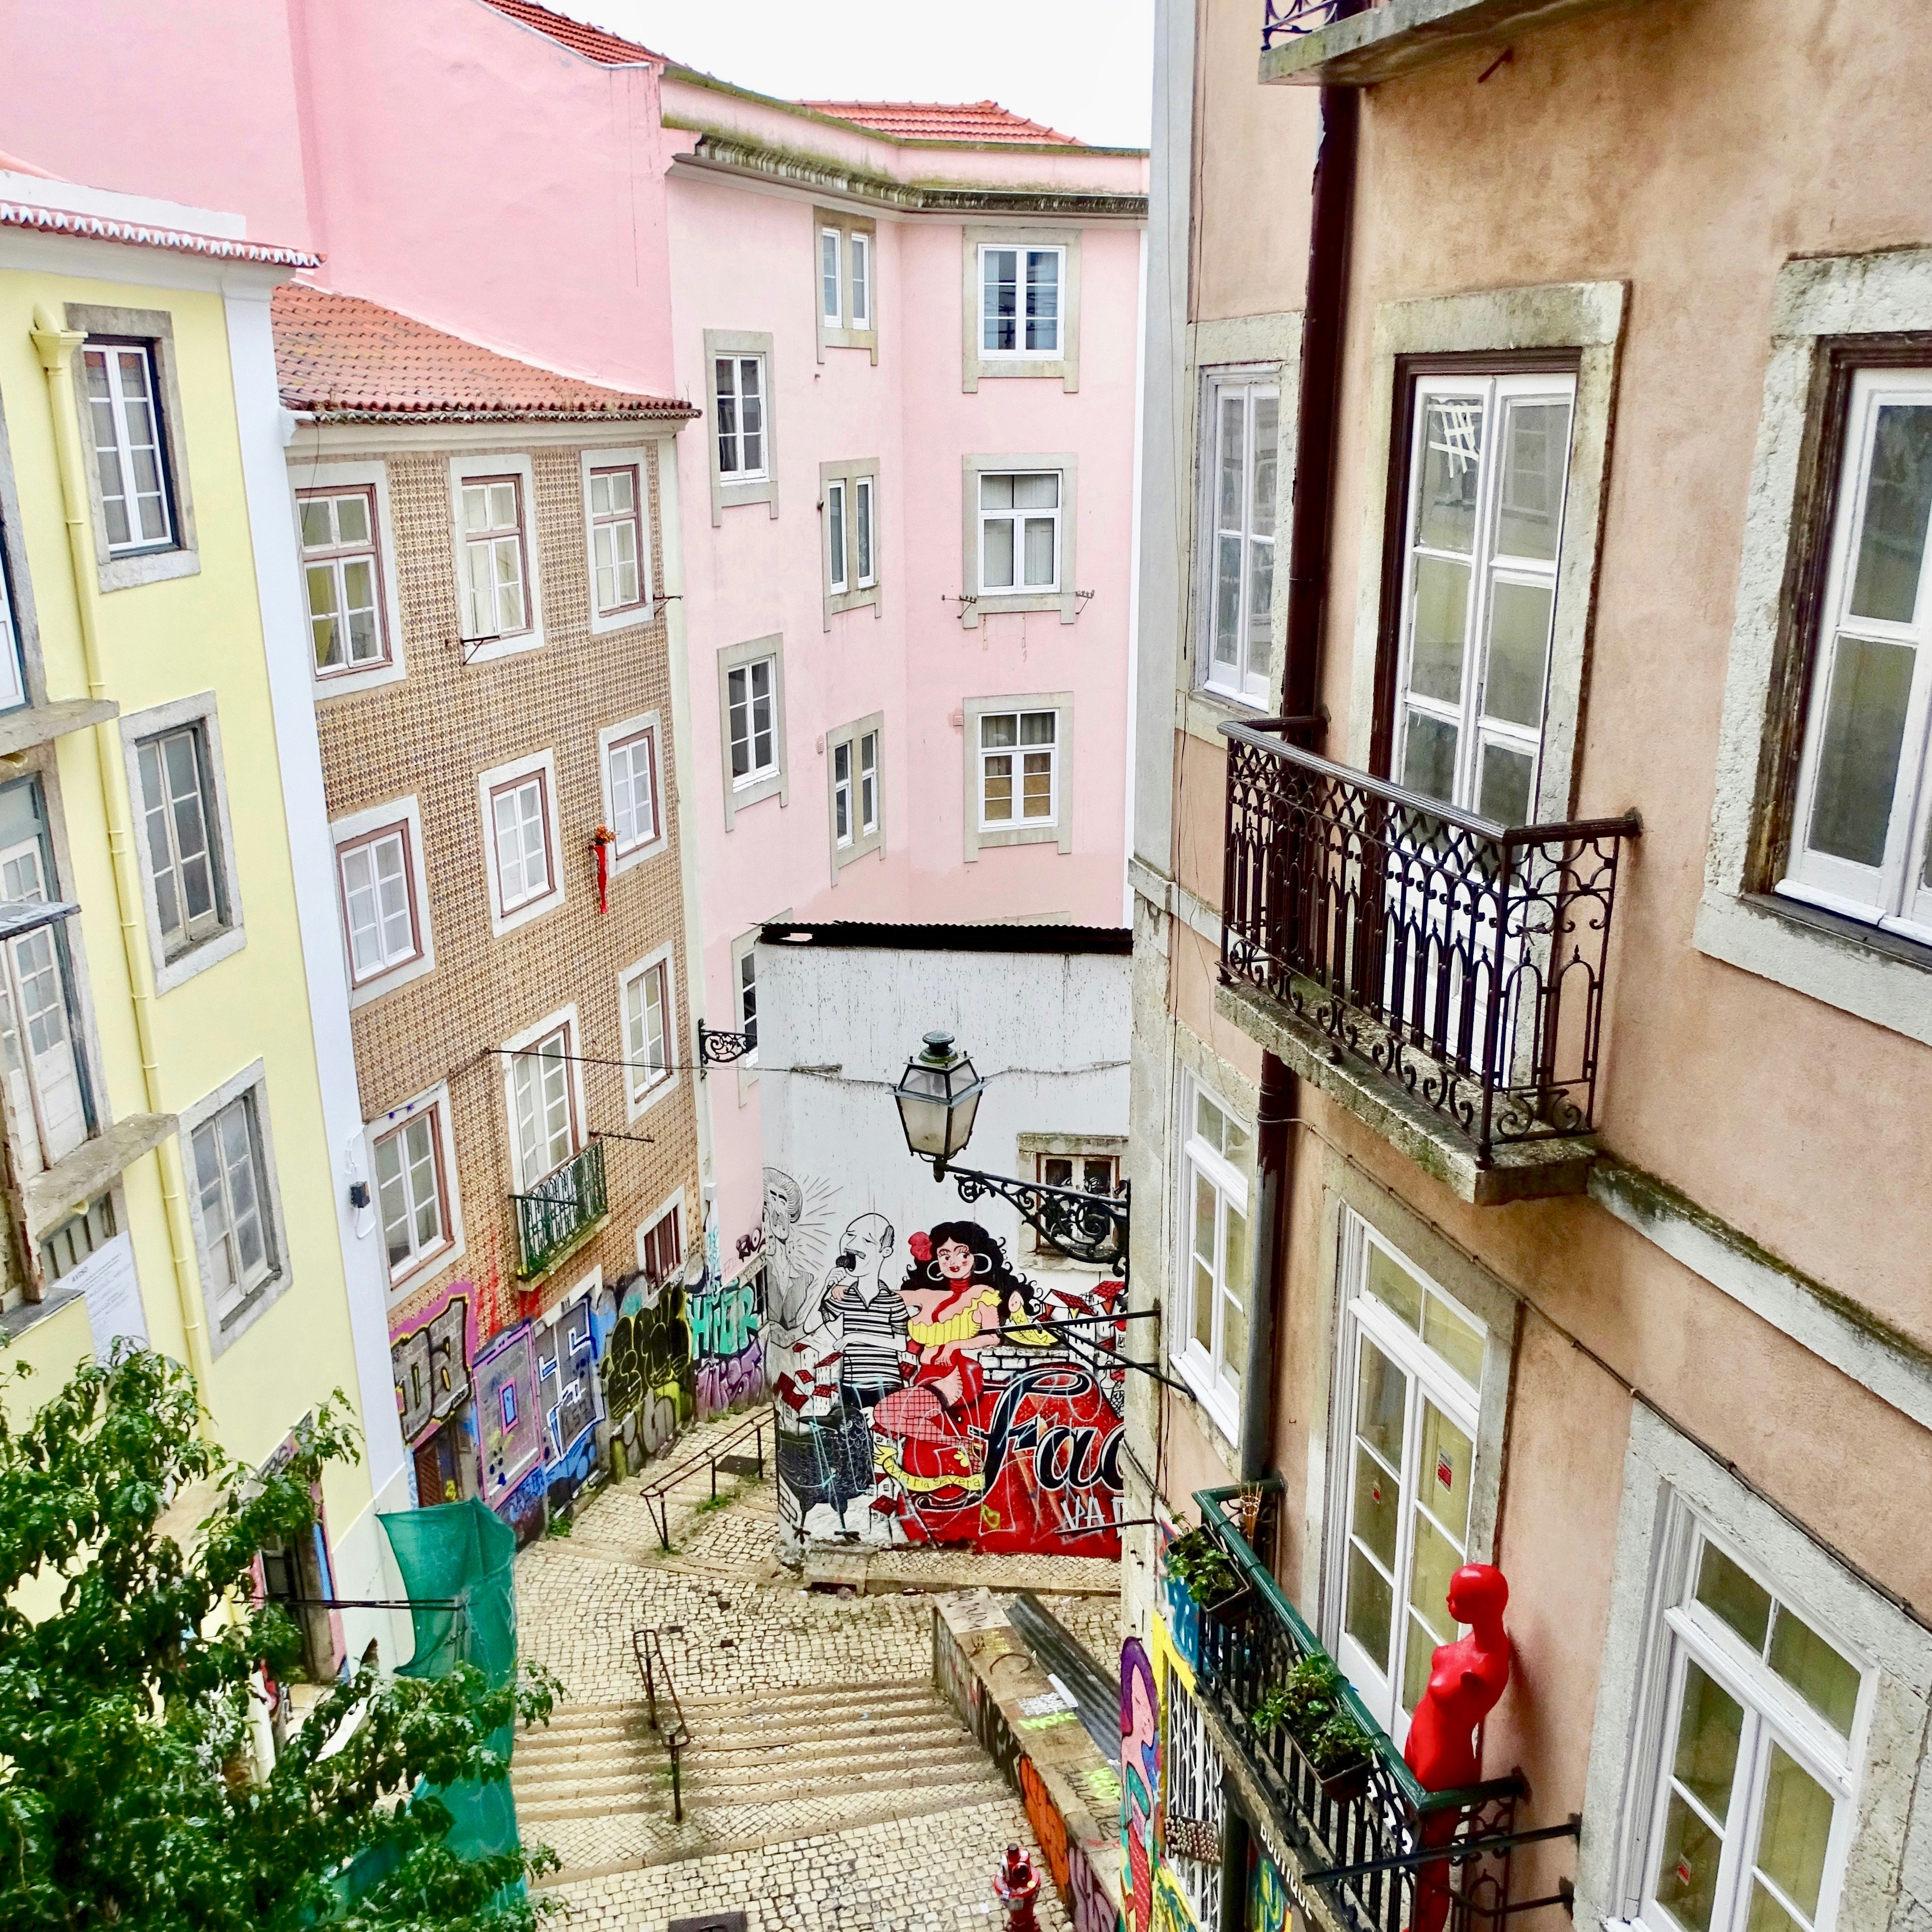 A view down a Lisbon alleyway with colourful buildings and a mural on the far wall.